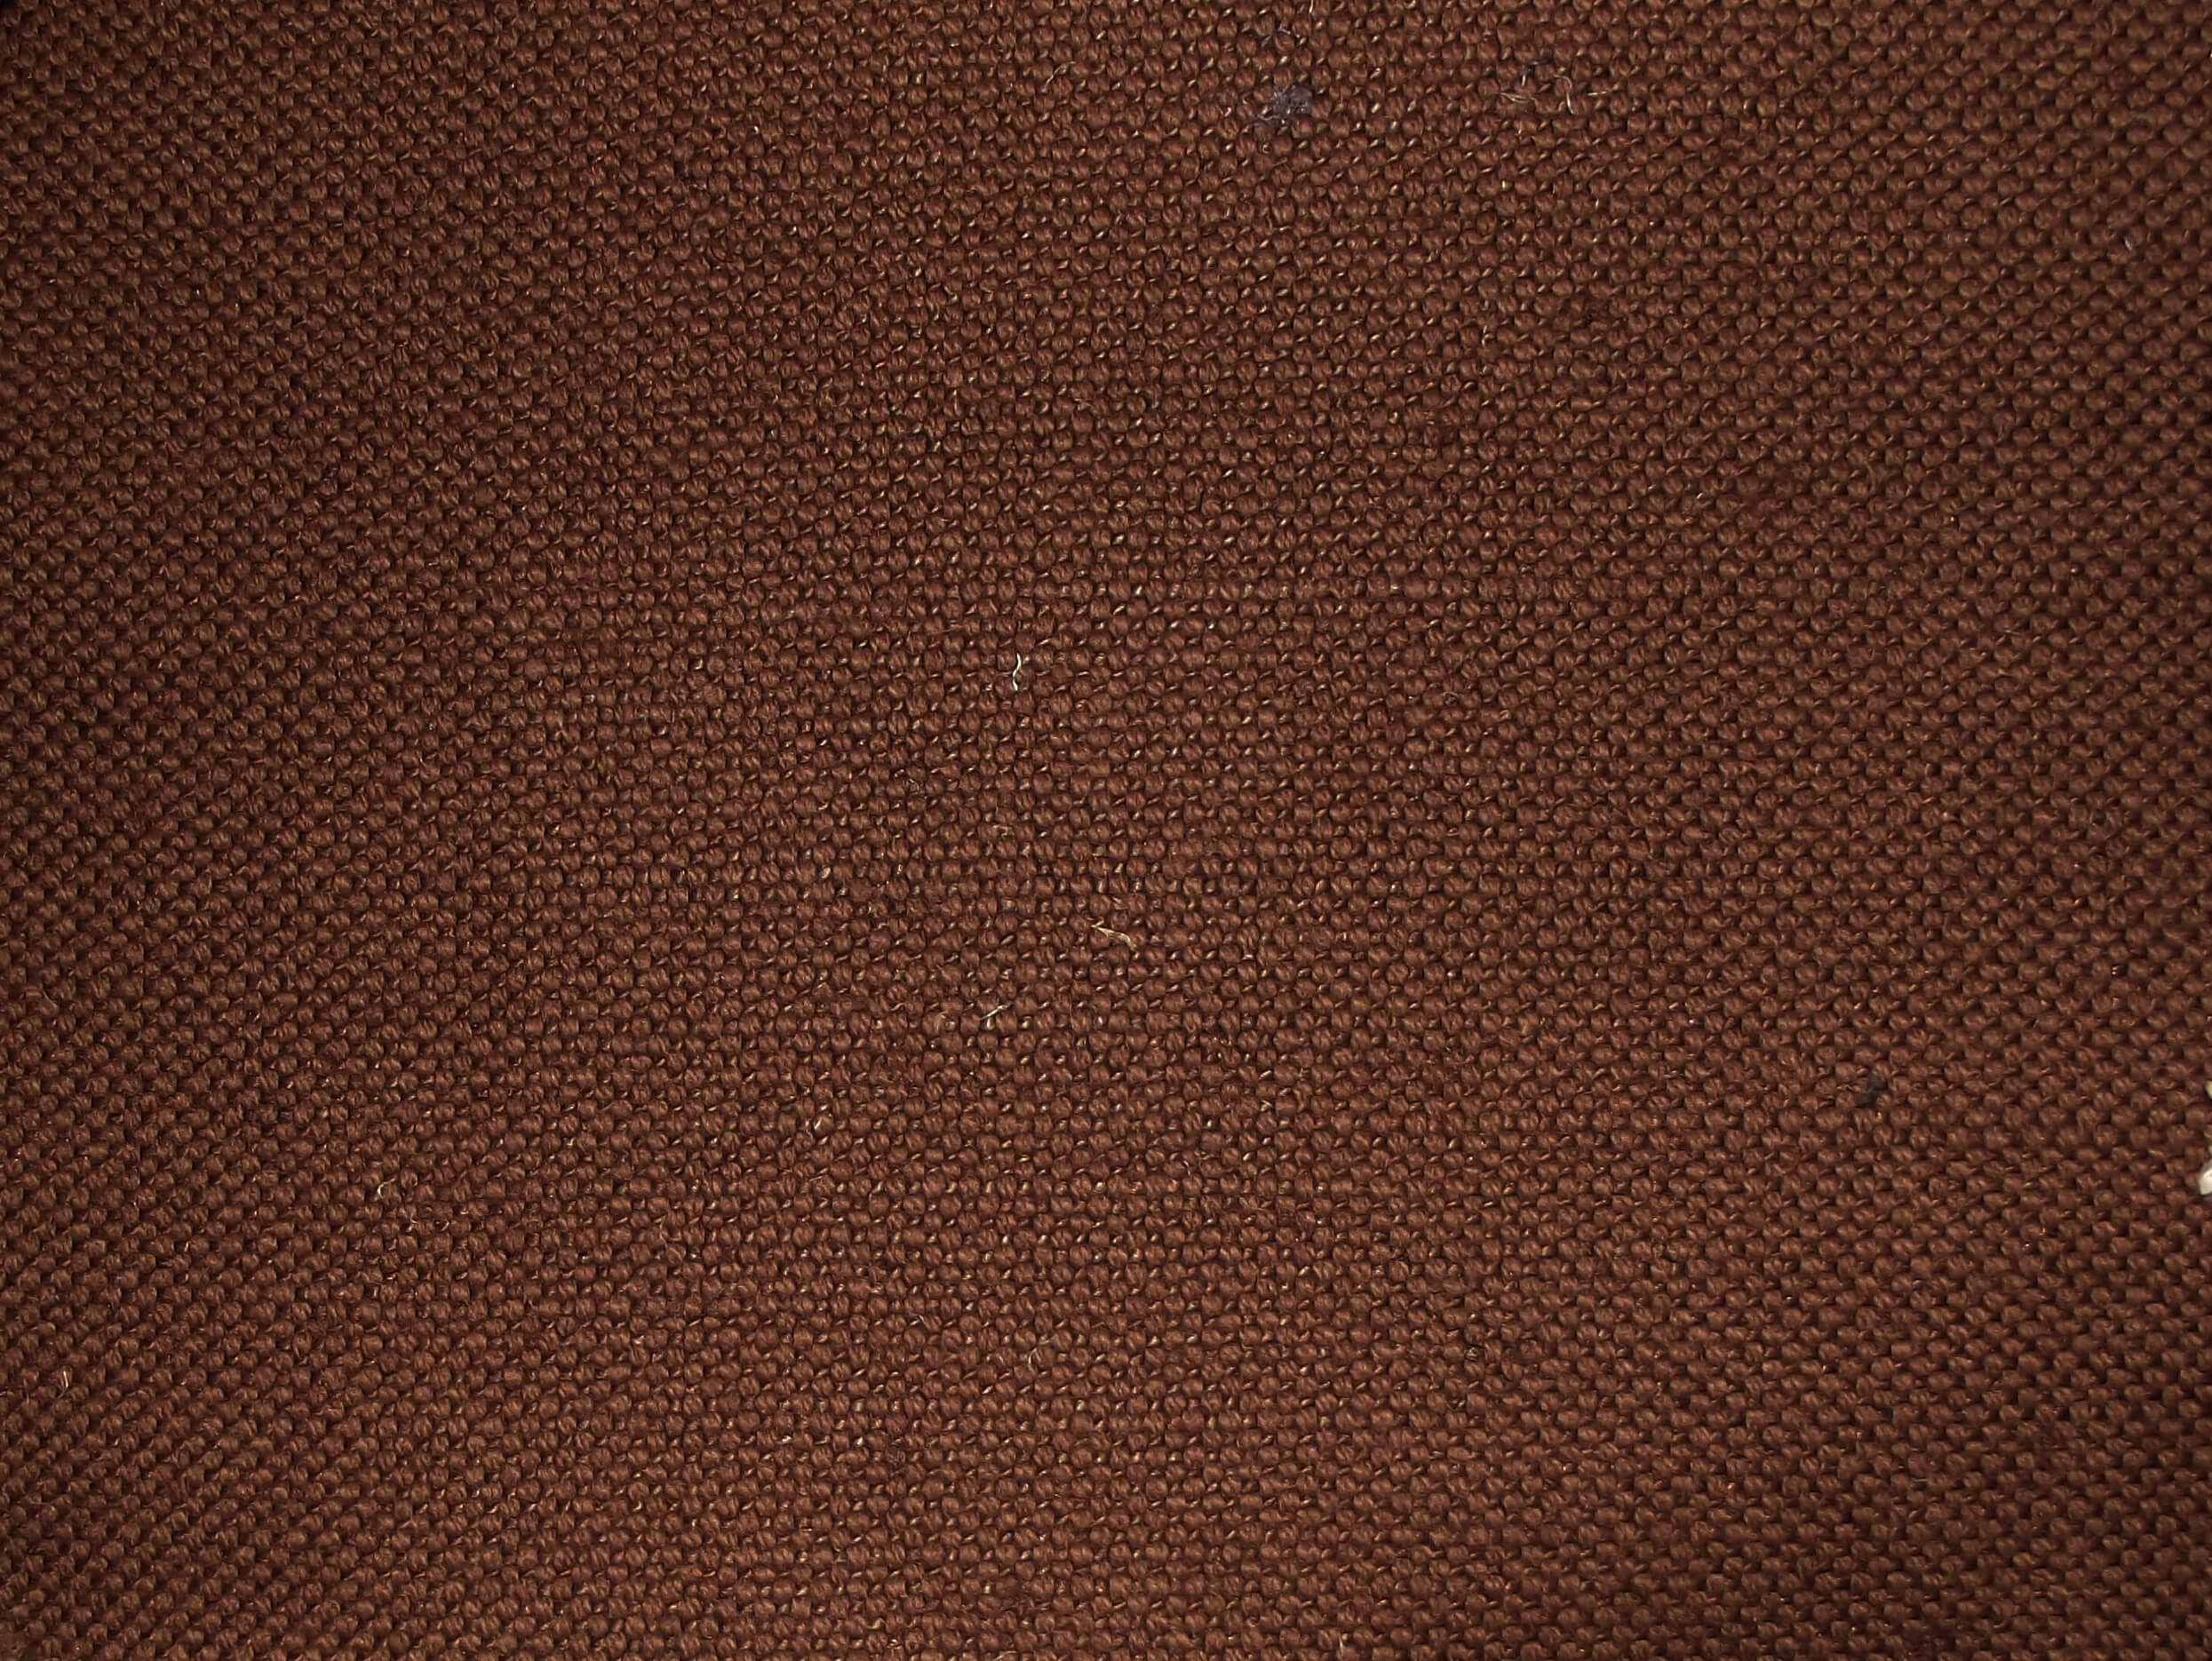 Buy chocolate Symphonic-C Acoustic Panel 2ft by 4ft